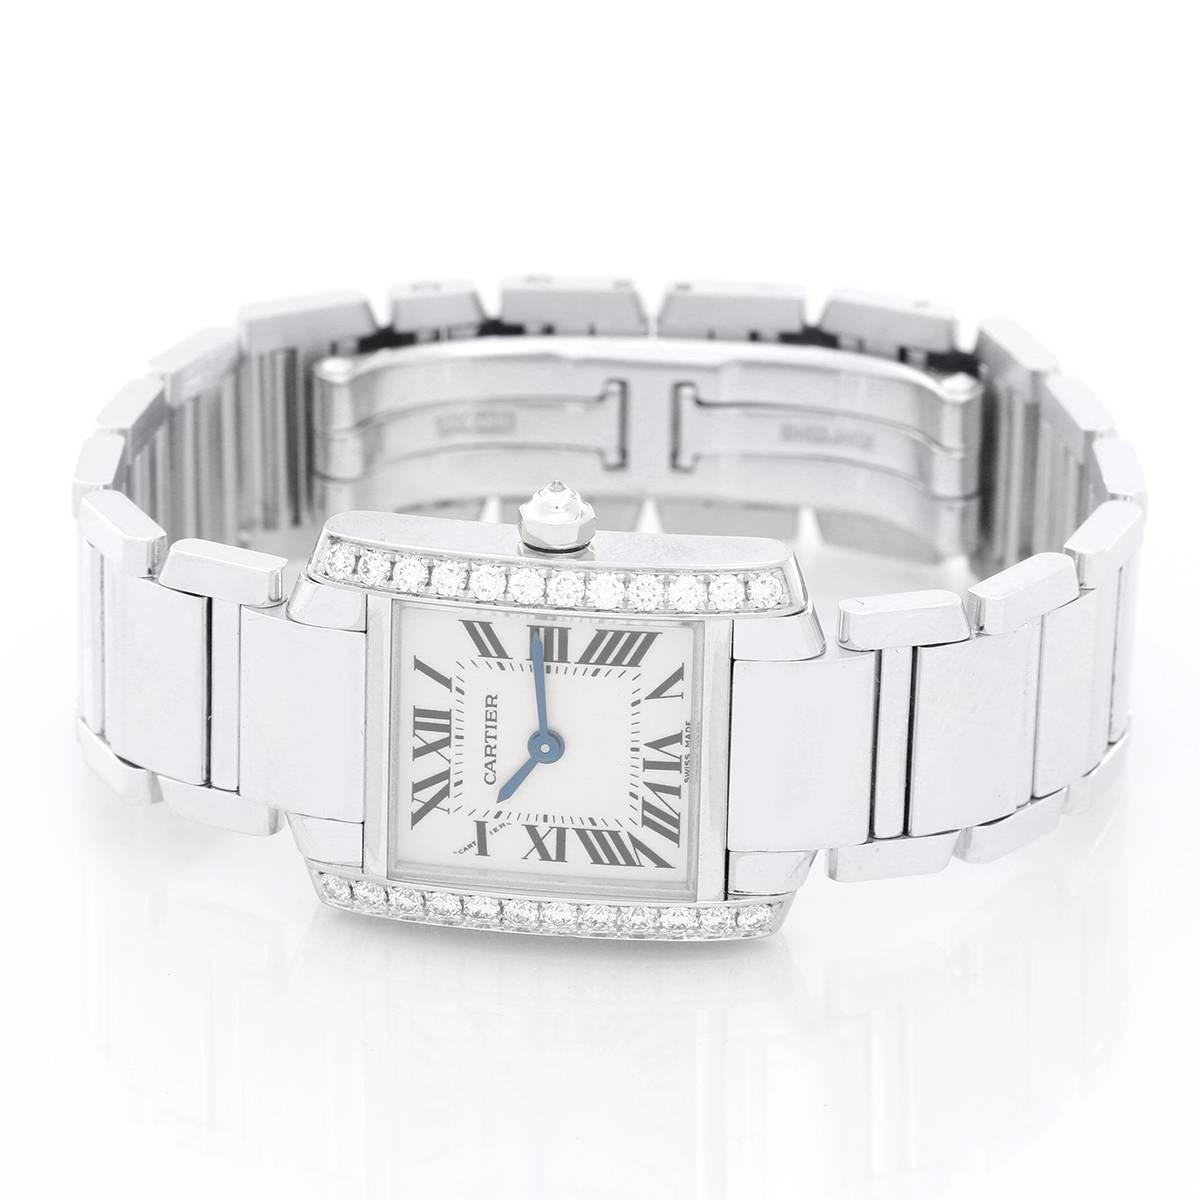 Cartier Tank Francaise 18k White Gold & Diamonds Ladies Watch WE1002S3 - Quartz. 18k white gold case with factory diamond bezel (20mm x 25mm). Ivory colored dial with black Roman numerals. Cartier 18k white gold bracelet.. Pre-owned with Cartier box